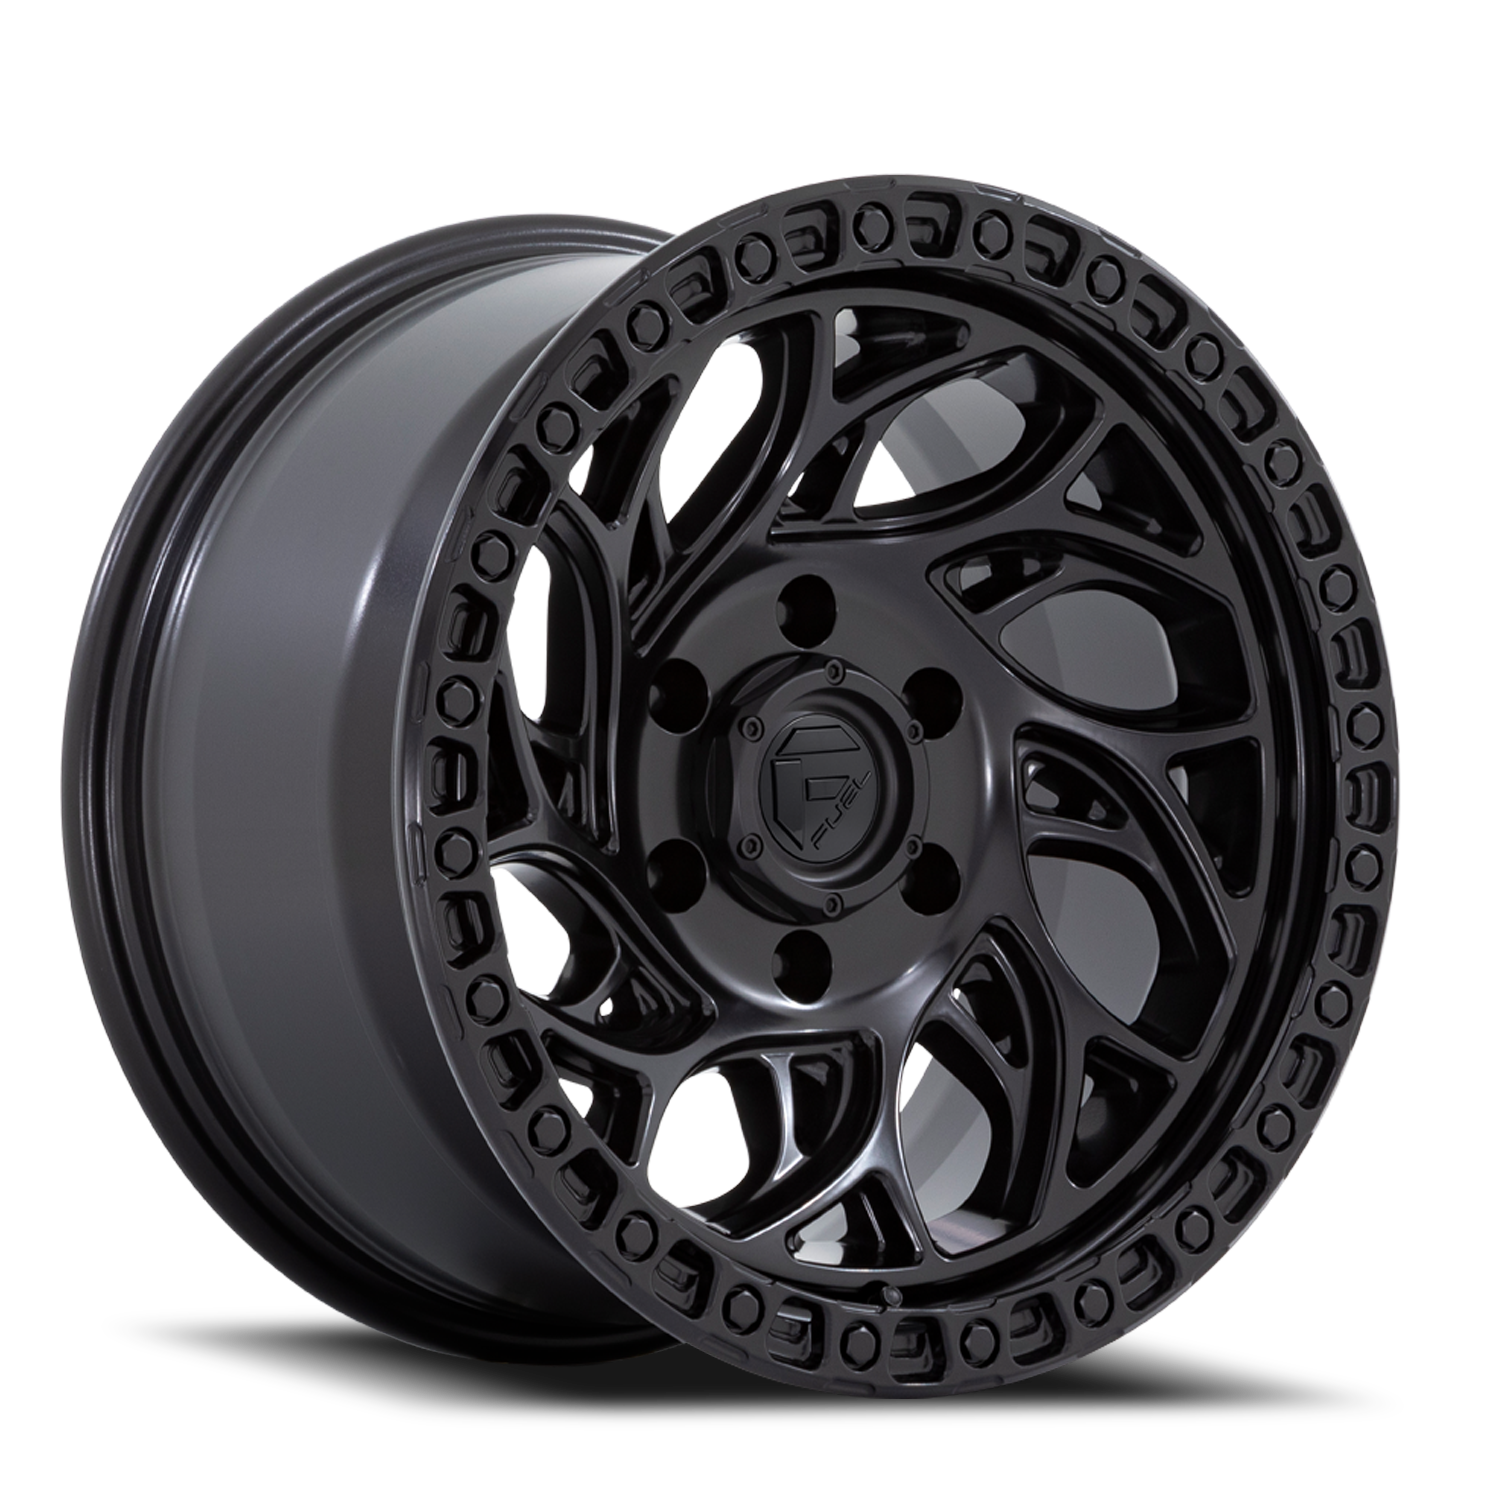 Aluminum Wheels 18X9 Runner OR D852 6 On 139.7 Blackout 106.1 Bore 1 Offset Fuel Off Road Wheels